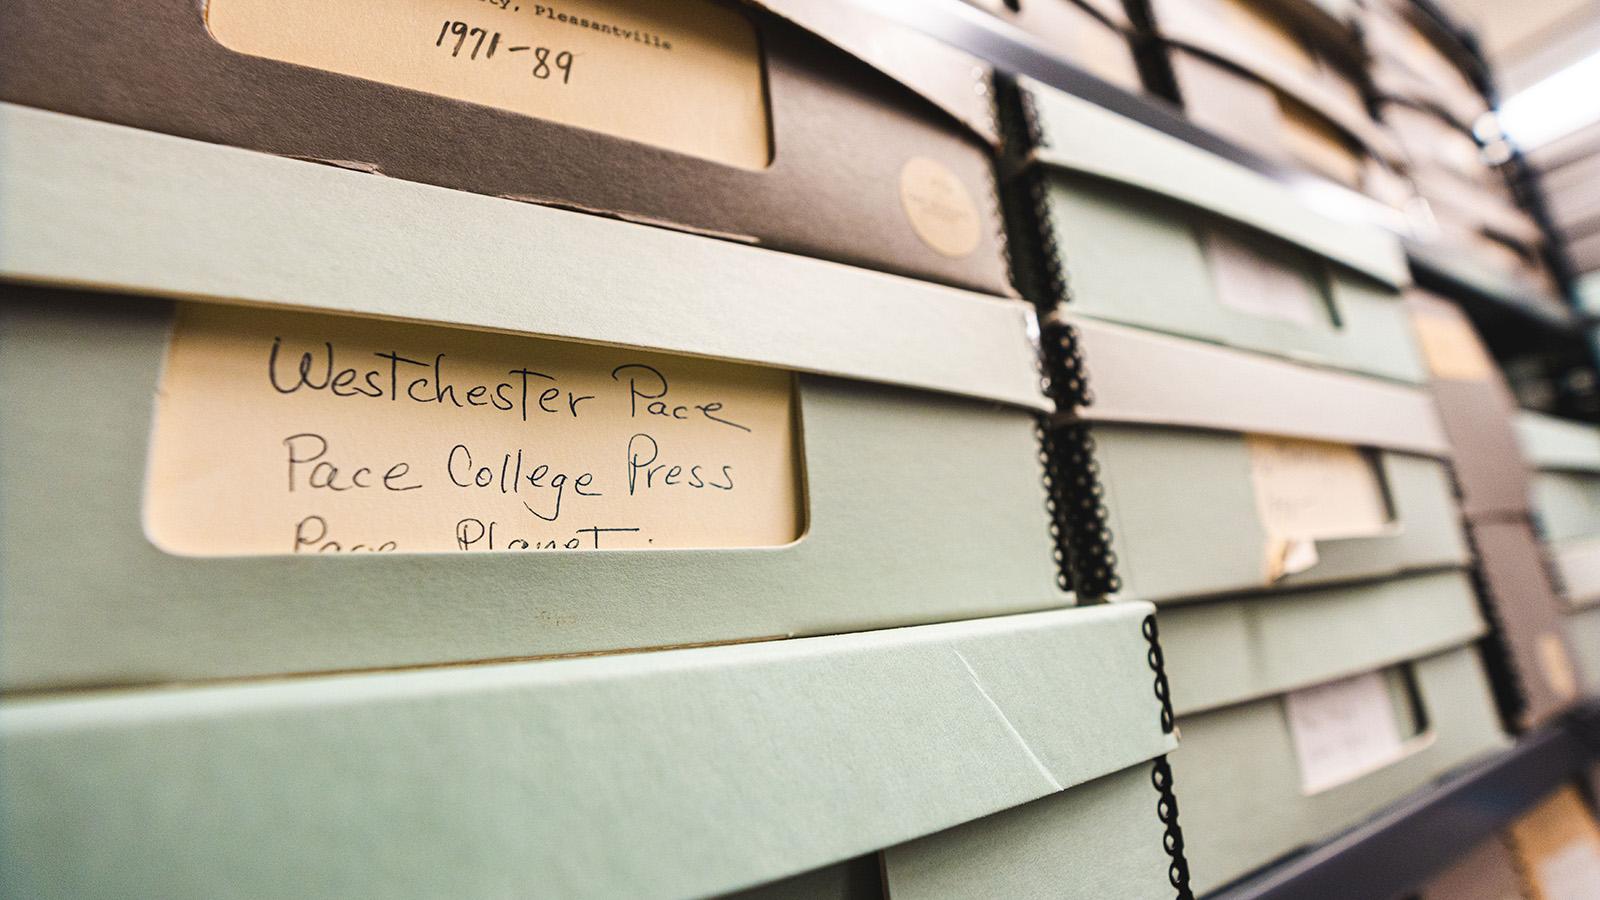 Archived boxes. A label reads "Westchester Pace. Pace College Press."